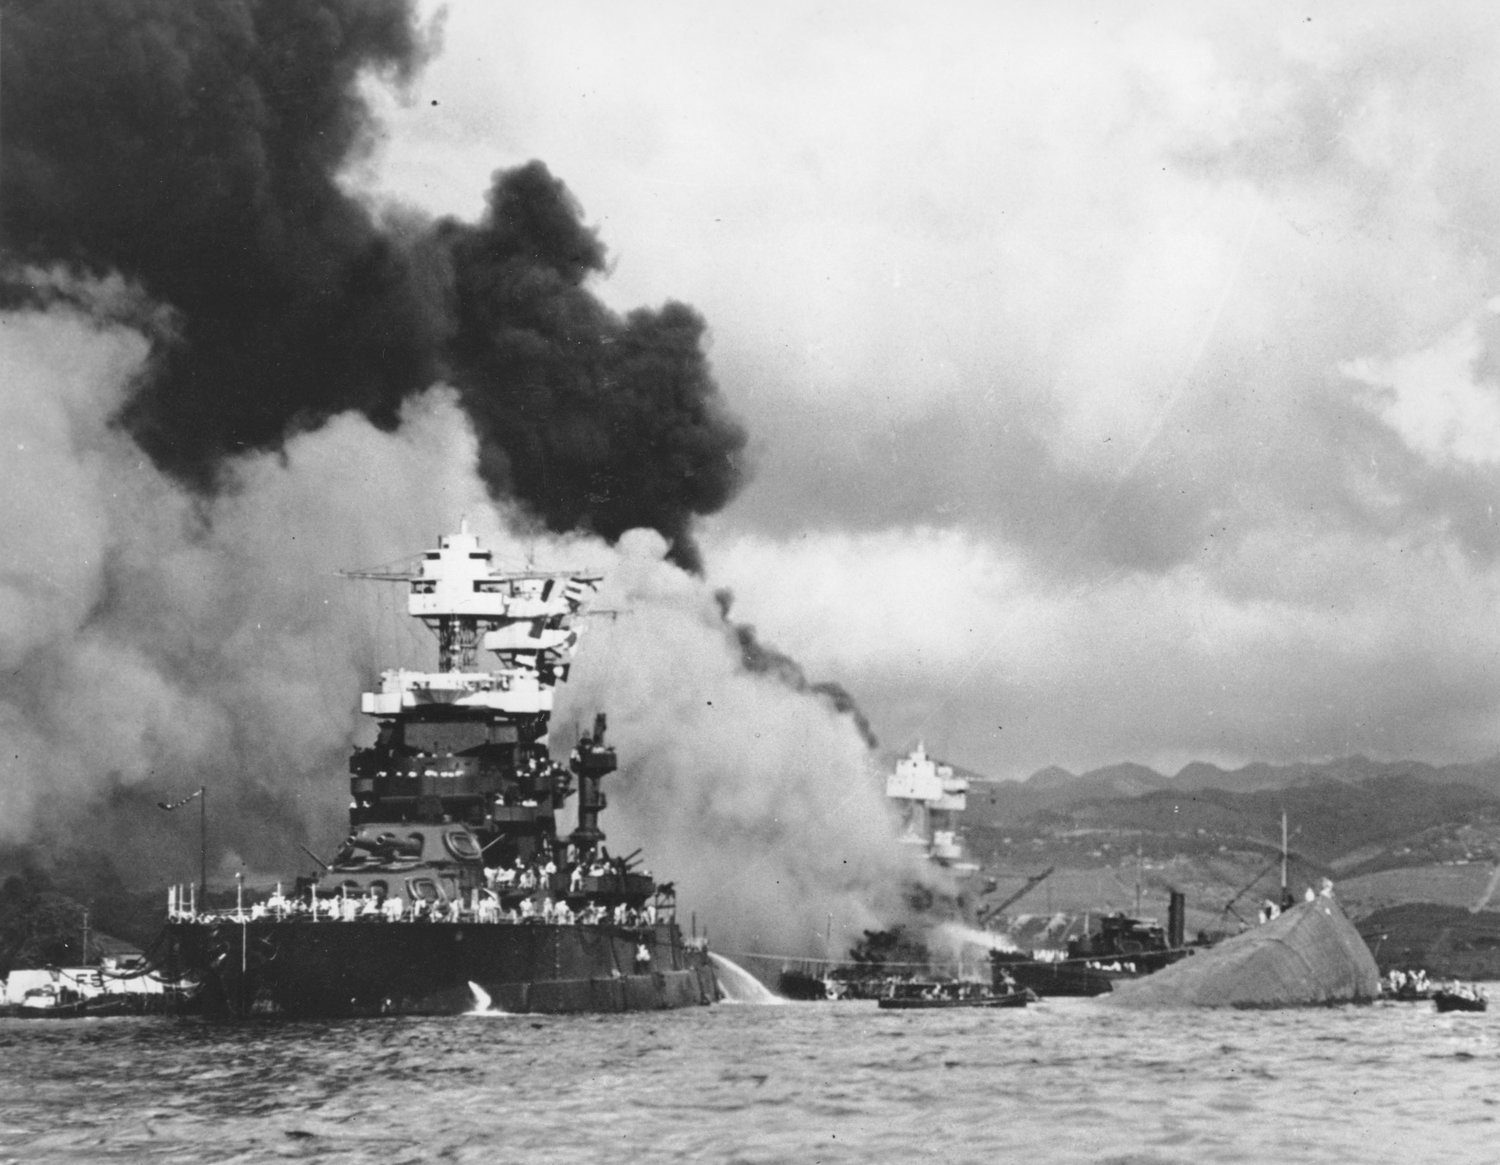 FILE - In this Dec. 7, 1941, file photo, part of the hull of the capsized USS Oklahoma is seen at right as the battleship USS West Virginia, center, begins to sink after suffering heavy damage, while the USS Maryland, left, is still afloat in Pearl Harbor, Oahu, Hawaii. Pearl Harbor survivors and World War II veterans are gathering in Hawaii this week to remember those killed in the Dec. 7, 1941 attack. Those attending will observe a moment of silence at 7:55 a.m., the minute the bombing began. The ceremony will mark the 80th anniversary of the attack that launched the U.S. into World War II.